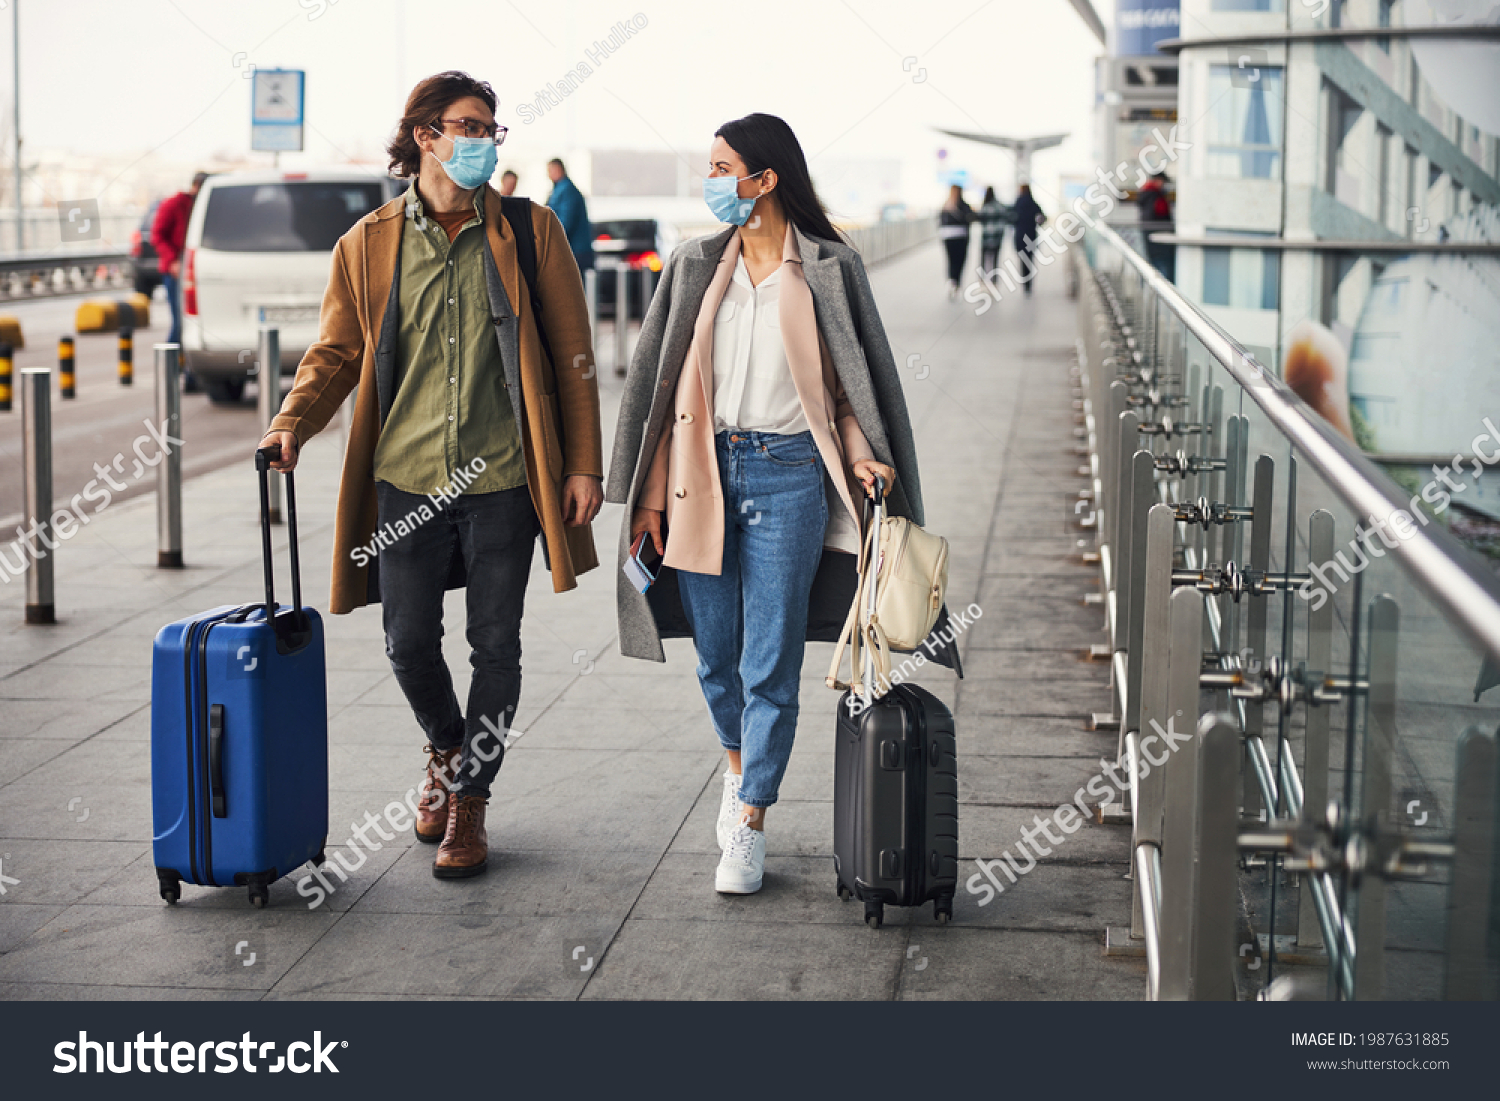 Stock Photo Lovely Couple In Medical Masks Walking Outdoors At Airport 1987631885 